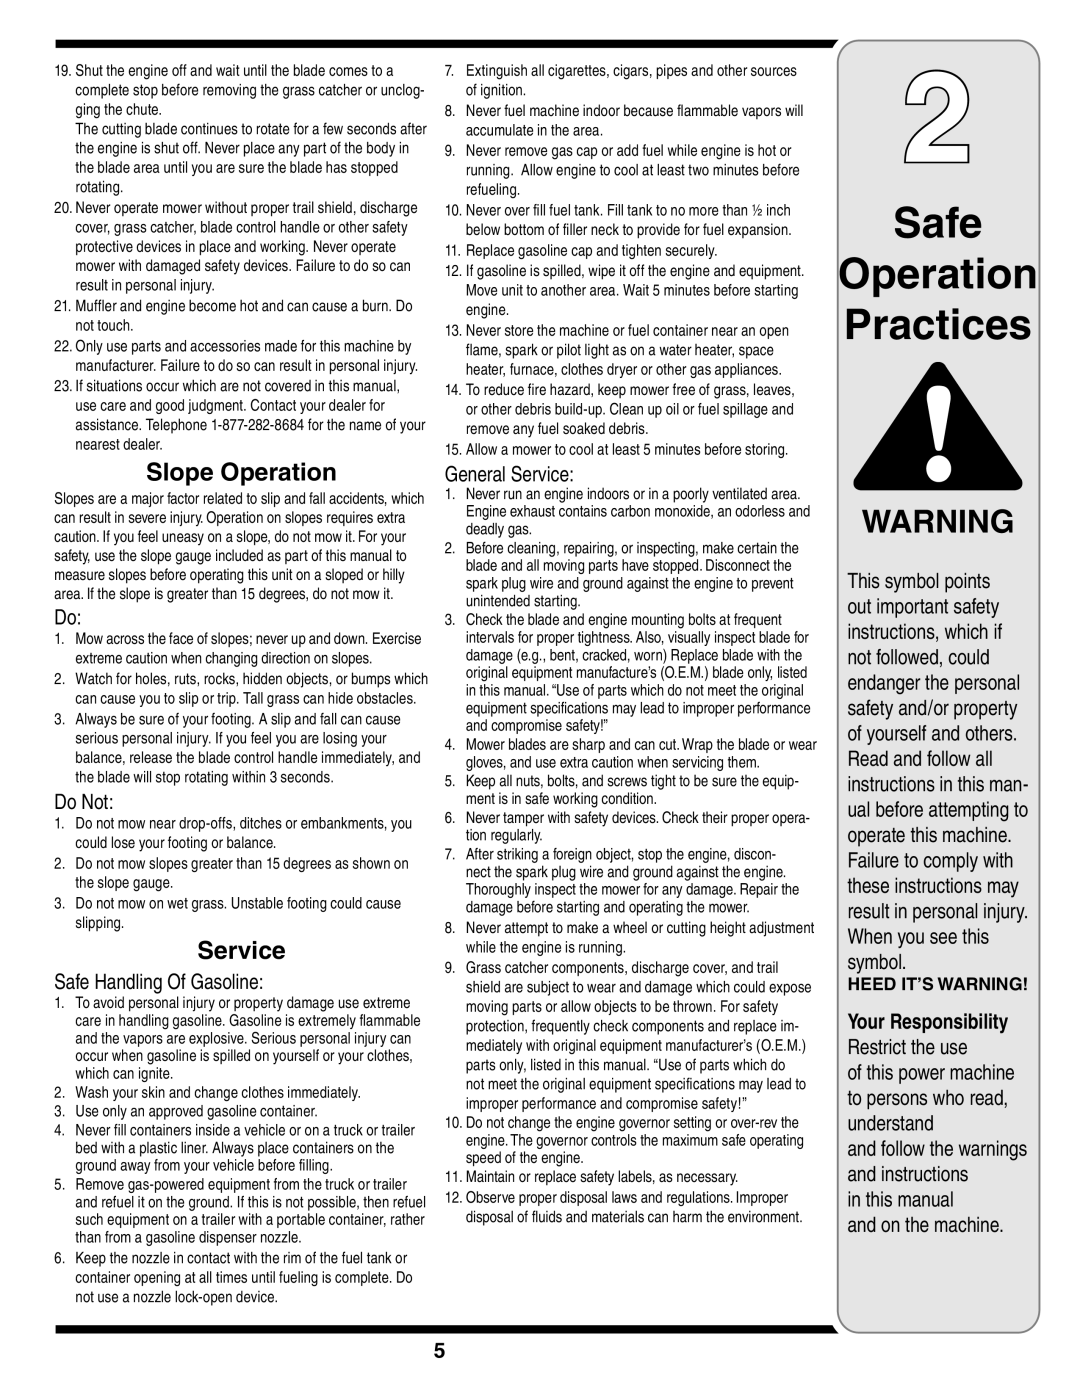 Cub Cadet 109 warranty Safe Operation Practices, Slope Operation, Service, Heed It’S Warning 